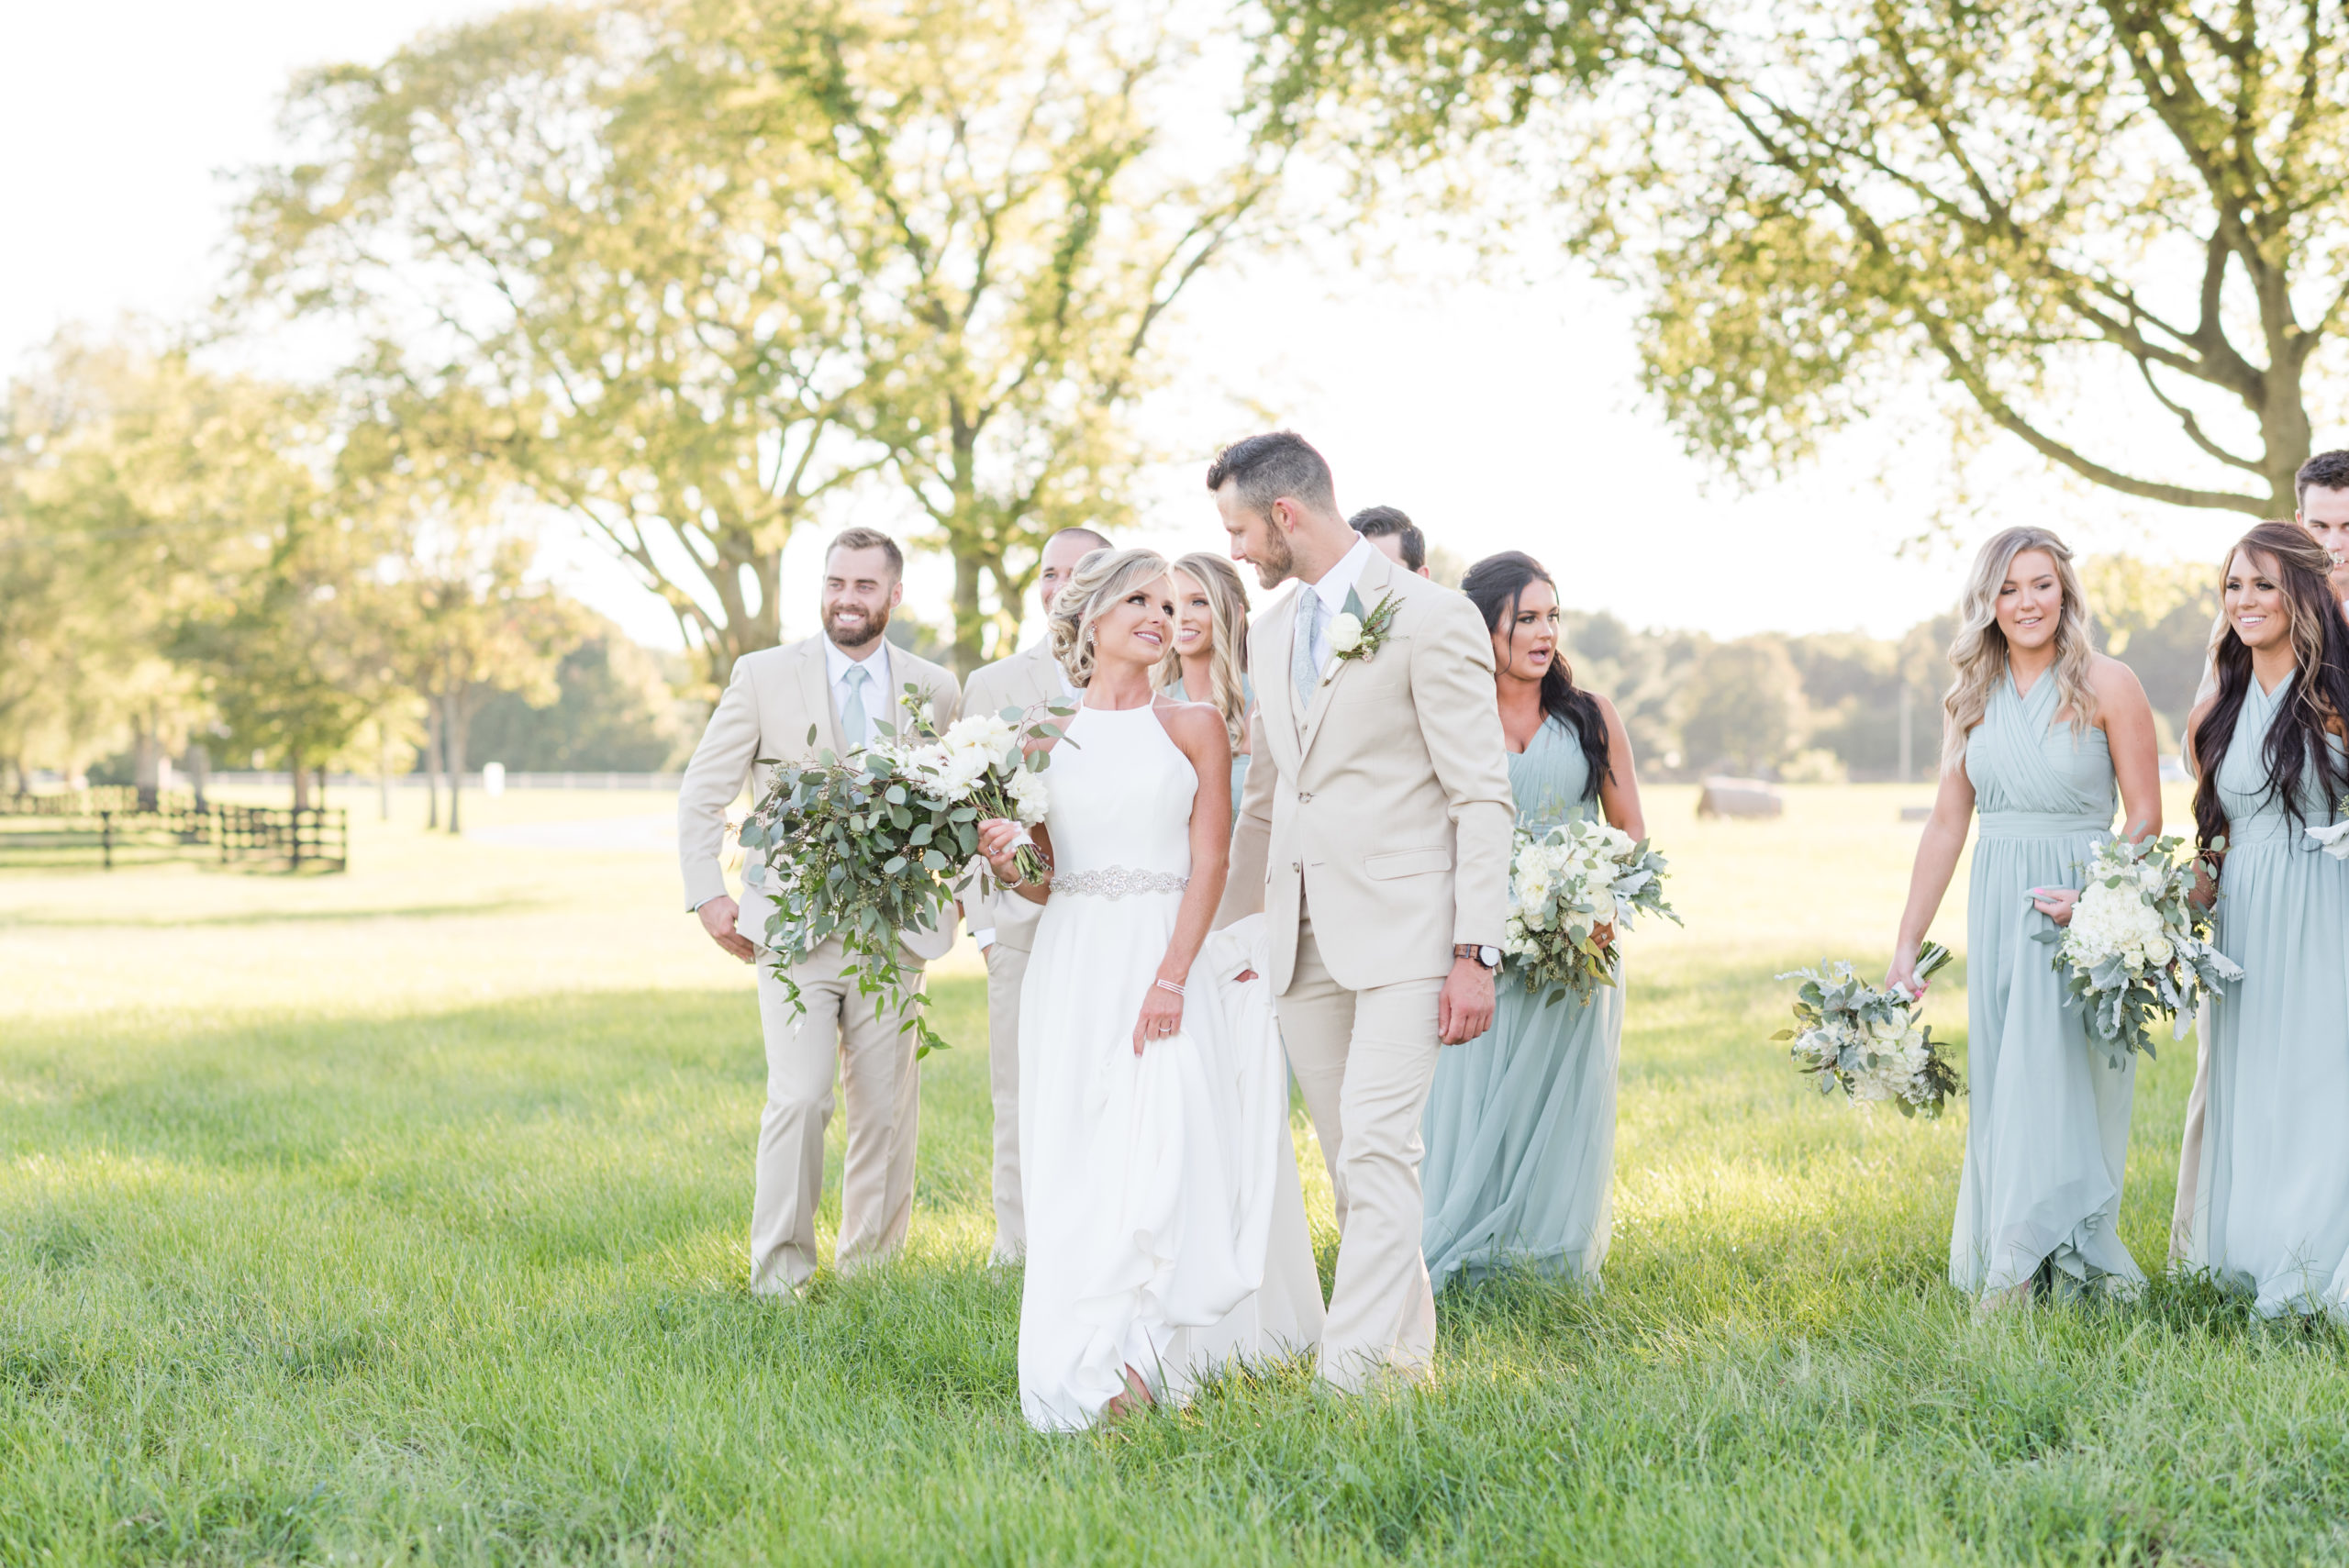 Fall Wedding at Holy Spirit Catholic Church and Mariah's in Bowling Green, Kentucky by Sweet Williams Photography, a wedding and portrait photographer.